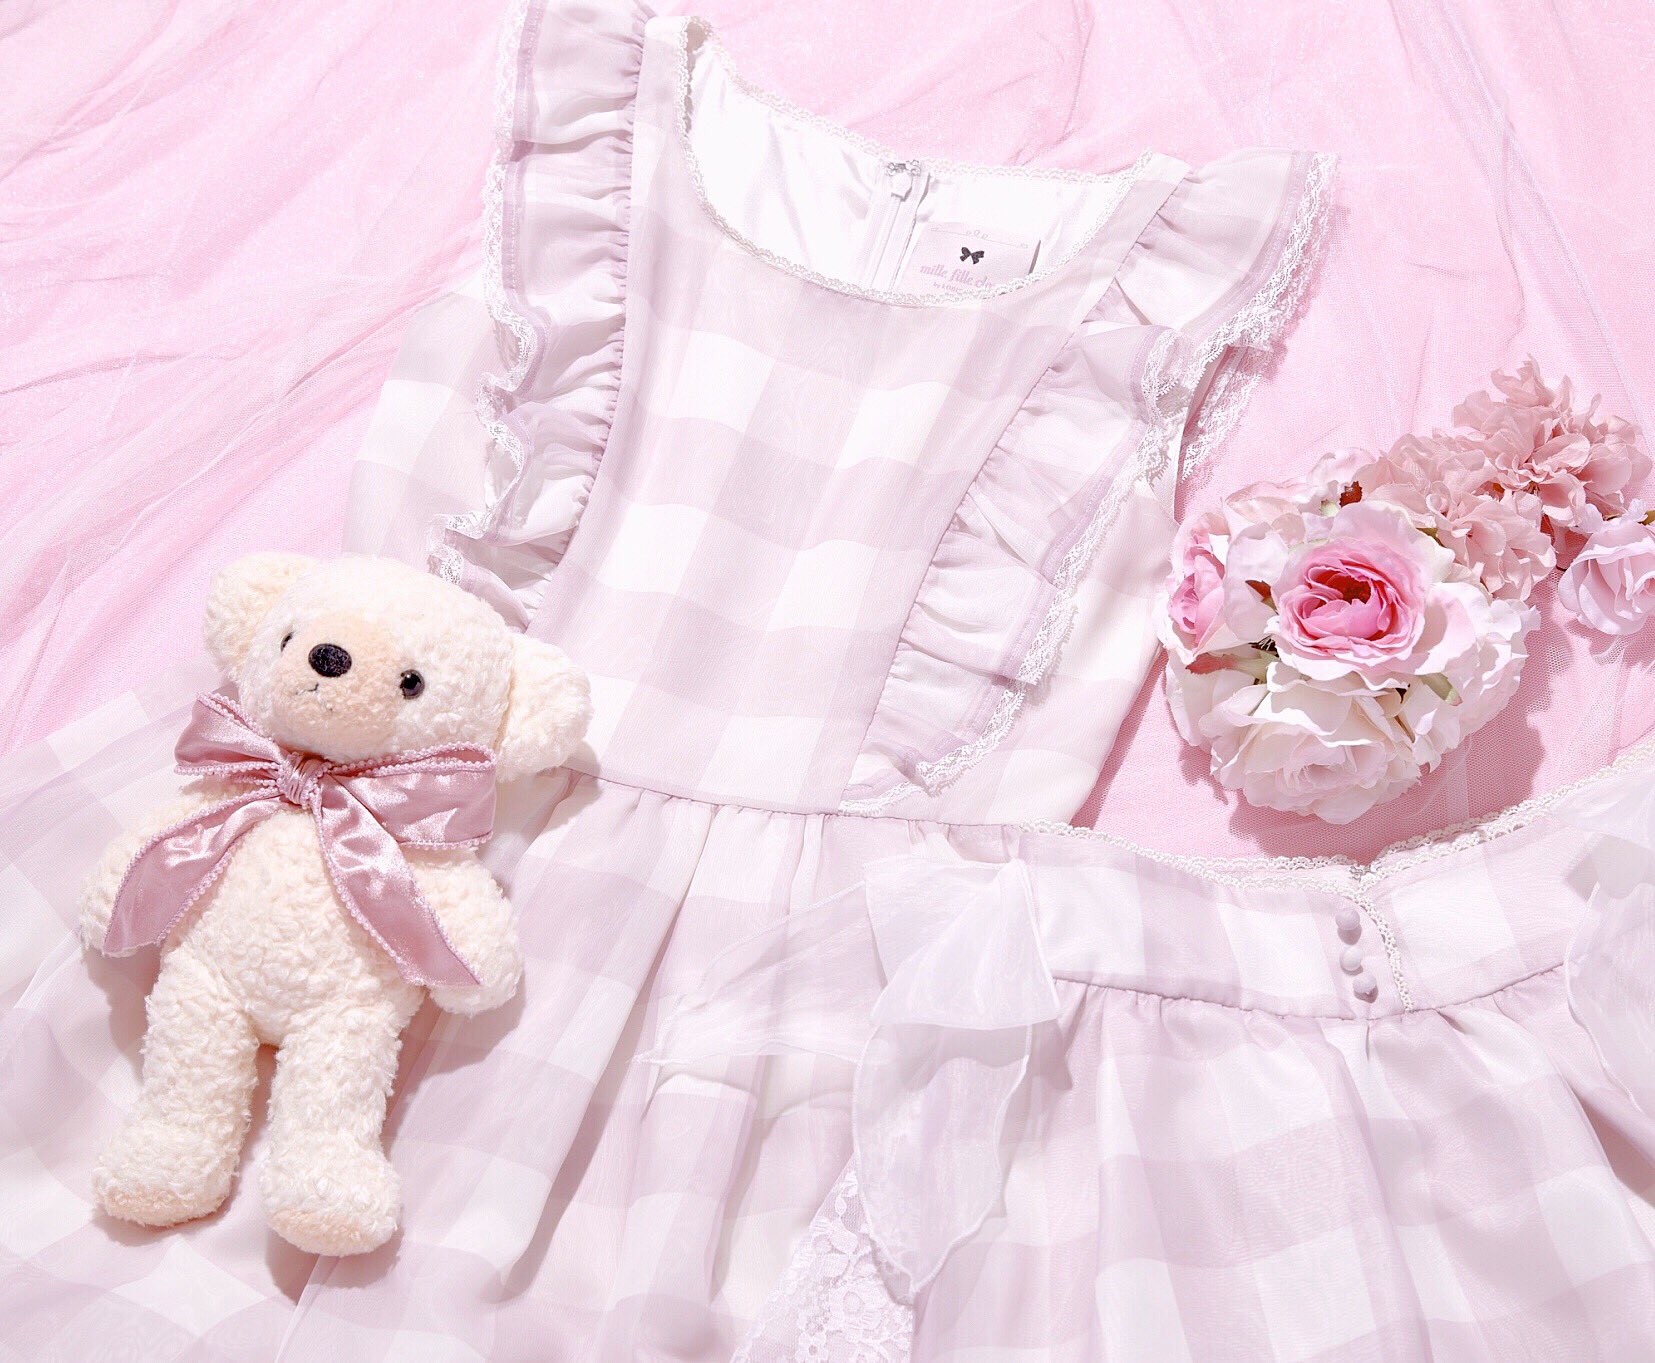 mille fille closet by LODISPOTTO［ミルフィーユクローゼット］ on 